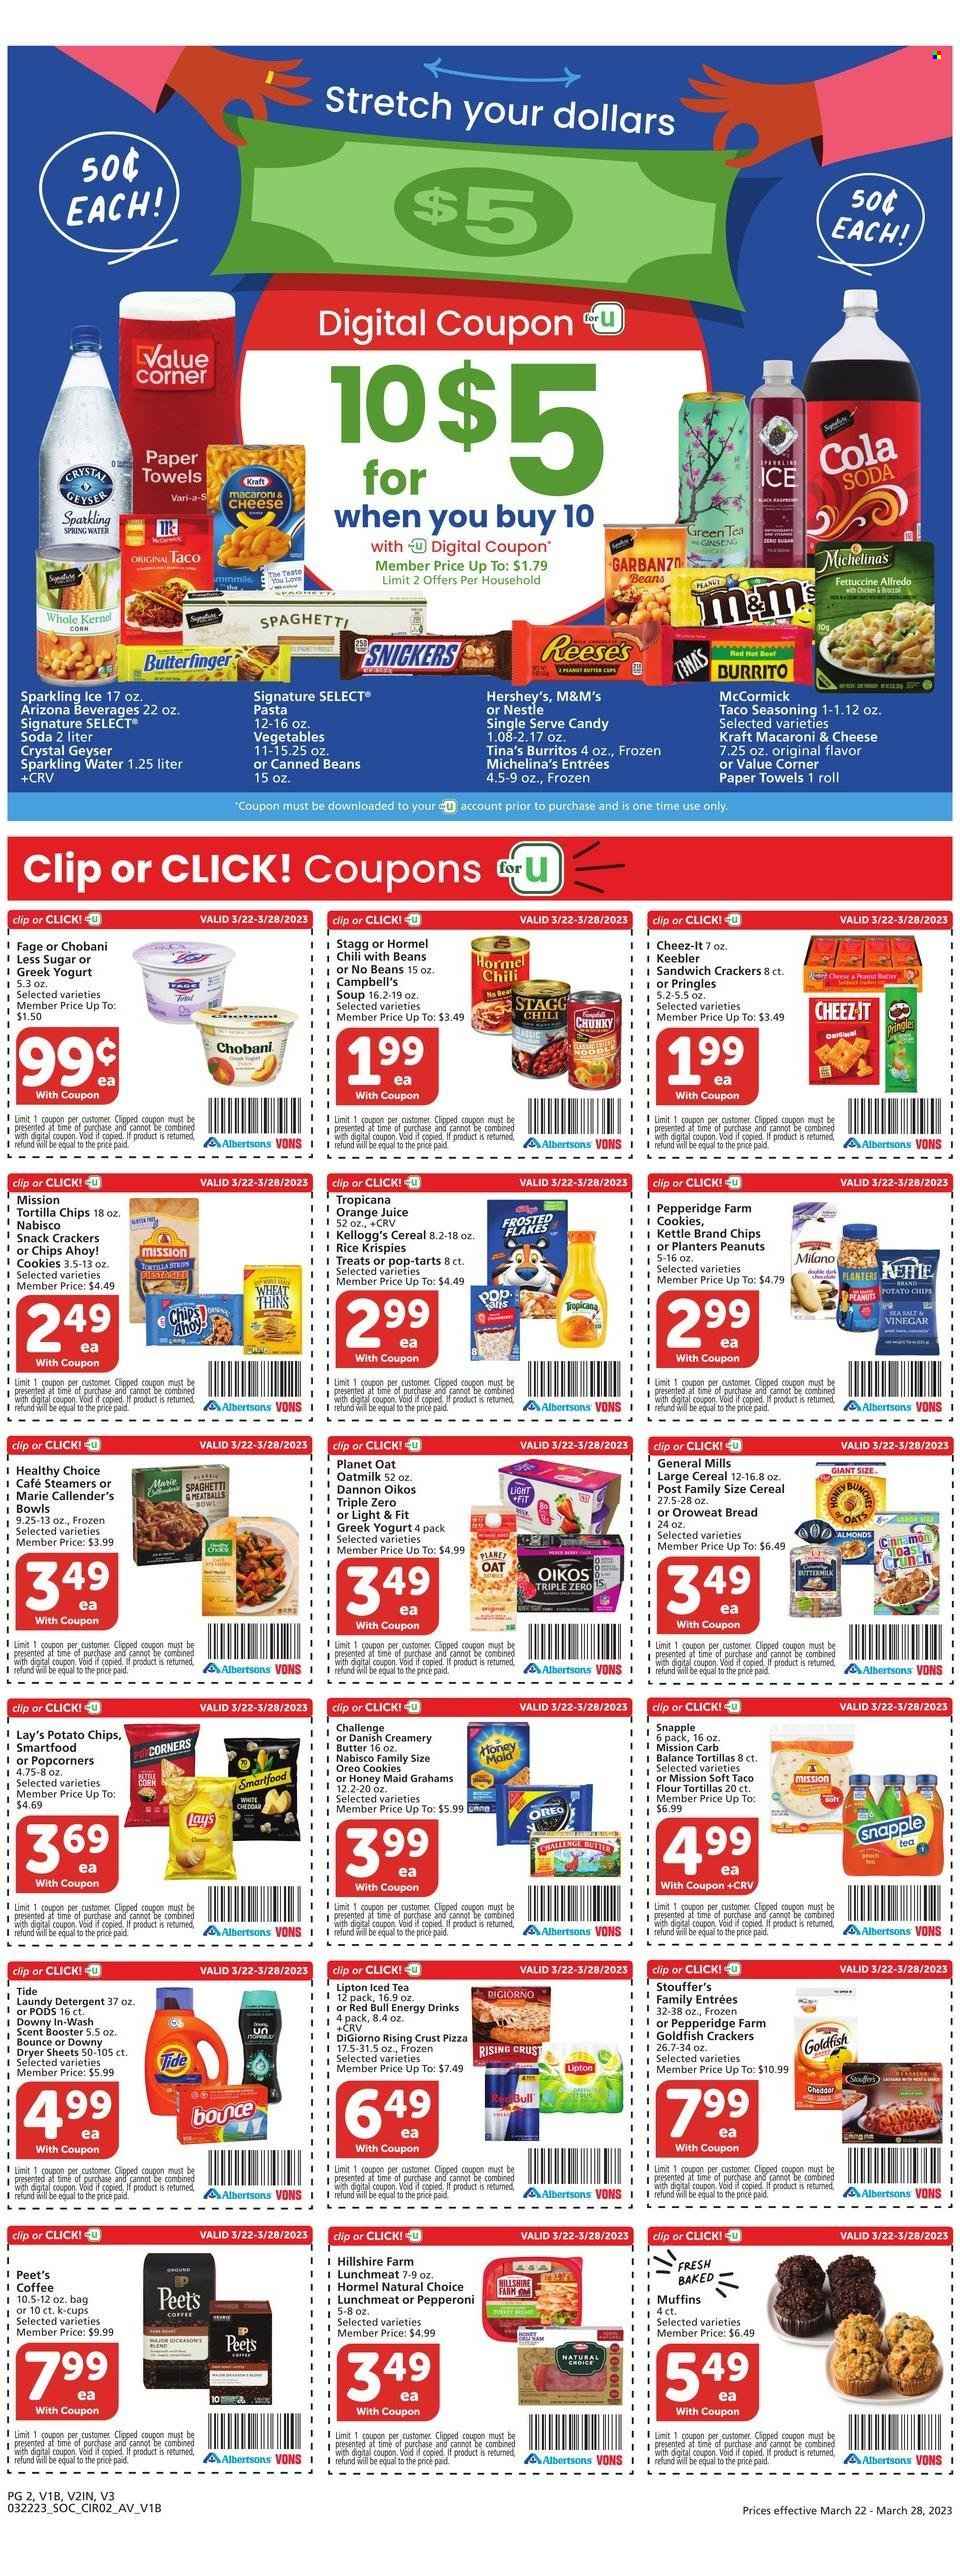 thumbnail - Vons Flyer - 03/22/2023 - 03/28/2023 - Sales products - bread, flour tortillas, muffin, corn, Campbell's, macaroni & cheese, spaghetti, pizza, meatballs, soup, pasta, burrito, Healthy Choice, Marie Callender's, Kraft®, Hormel, Hillshire Farm, pepperoni, lunch meat, greek yoghurt, Oreo, yoghurt, Oikos, Chobani, Dannon, oat milk, dip, Reese's, Hershey's, Stouffer's, cookies, Nestlé, snack, Snickers, M&M's, crackers, Kellogg's, Pop-Tarts, Chips Ahoy!, Keebler, tortilla chips, potato chips, Pringles, Lay’s, Smartfood, Thins, popcorn, Goldfish, Cheez-It, cereals, Rice Krispies, Frosted Flakes, Honey Maid, spice, almonds, peanuts, Planters, orange juice, juice, energy drink, Lipton, ice tea, Red Bull, AriZona, Snapple, soda, sparkling water, water, green tea, coffee, coffee capsules, K-Cups, kitchen towels, paper towels, detergent, Tide, dryer sheets, Downy Laundry, Signal, ginseng. Page 2.